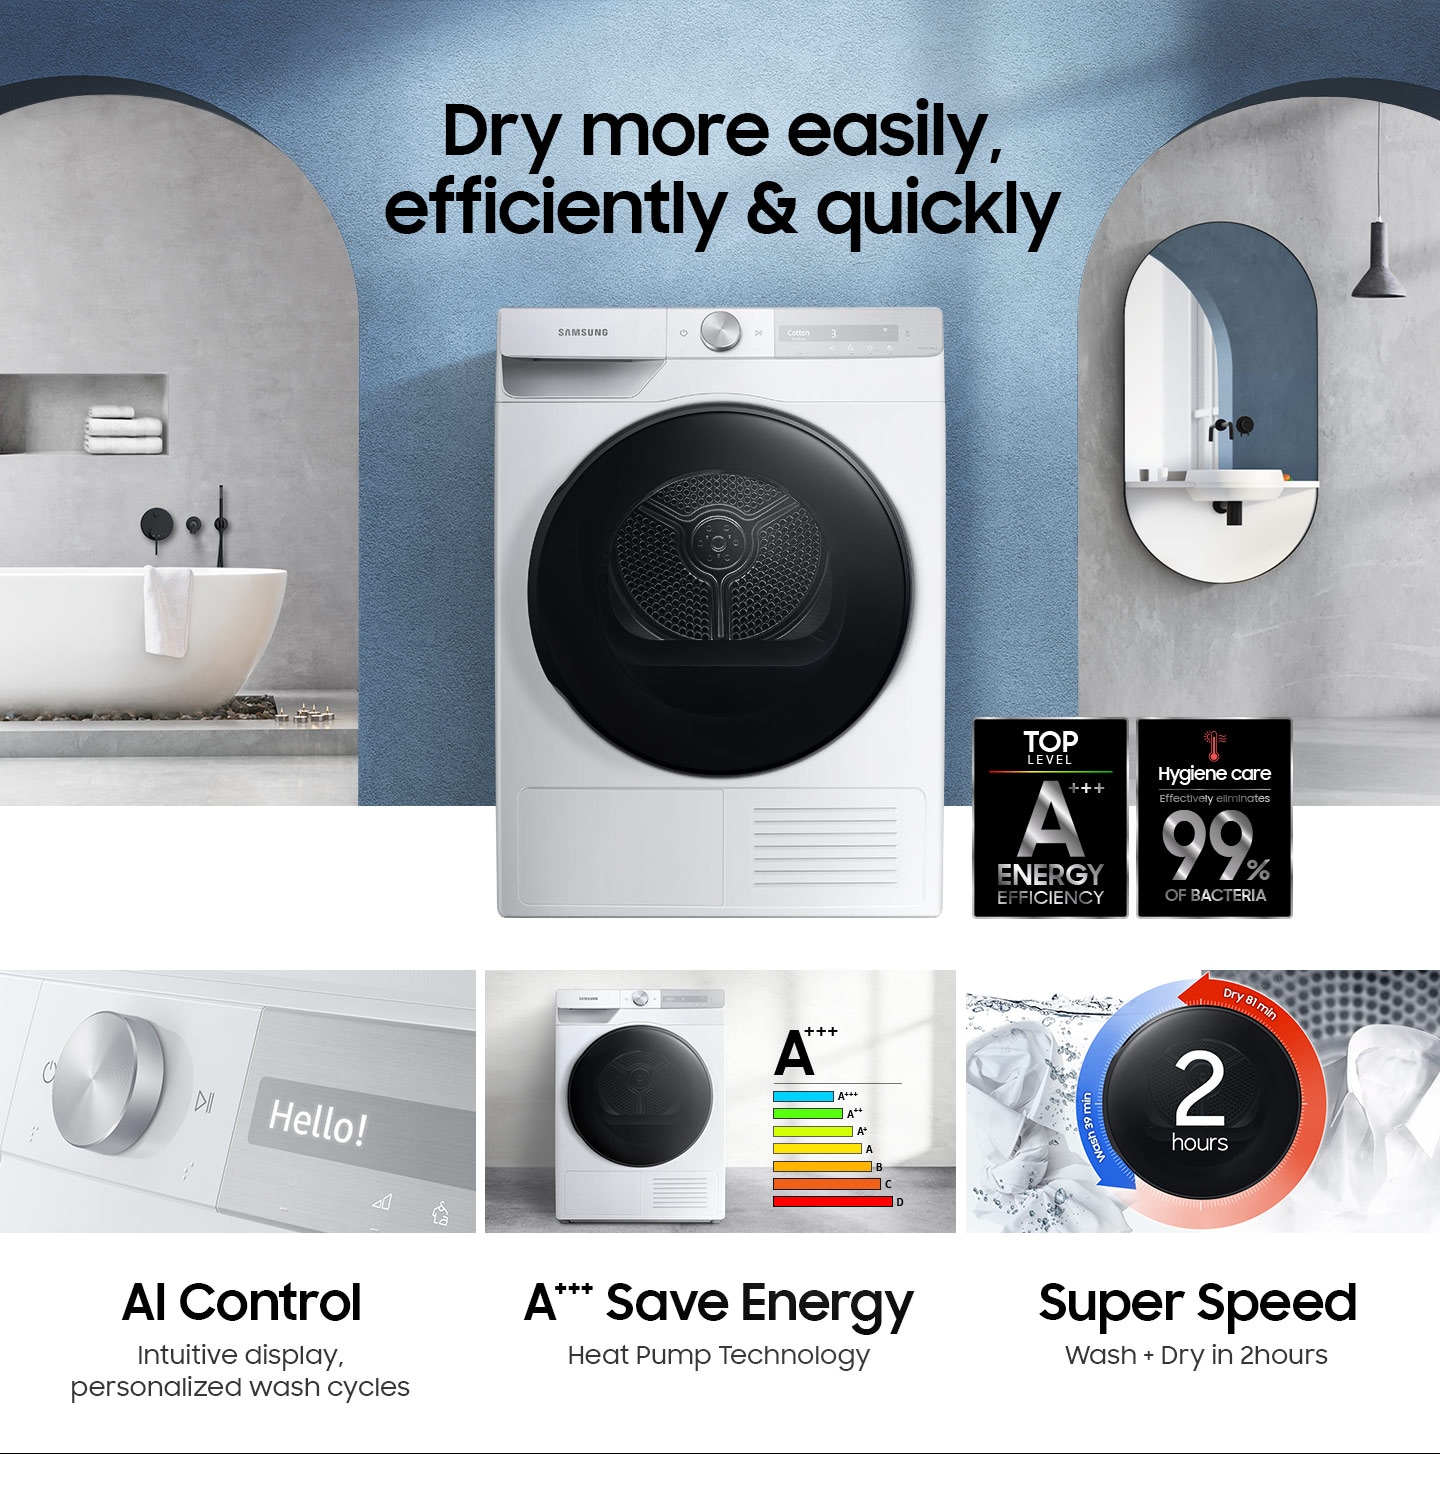 DV7000T is energy-efficient and 99% germ-free with AI Control, A+++ Save Energy, and Super Speed functions.